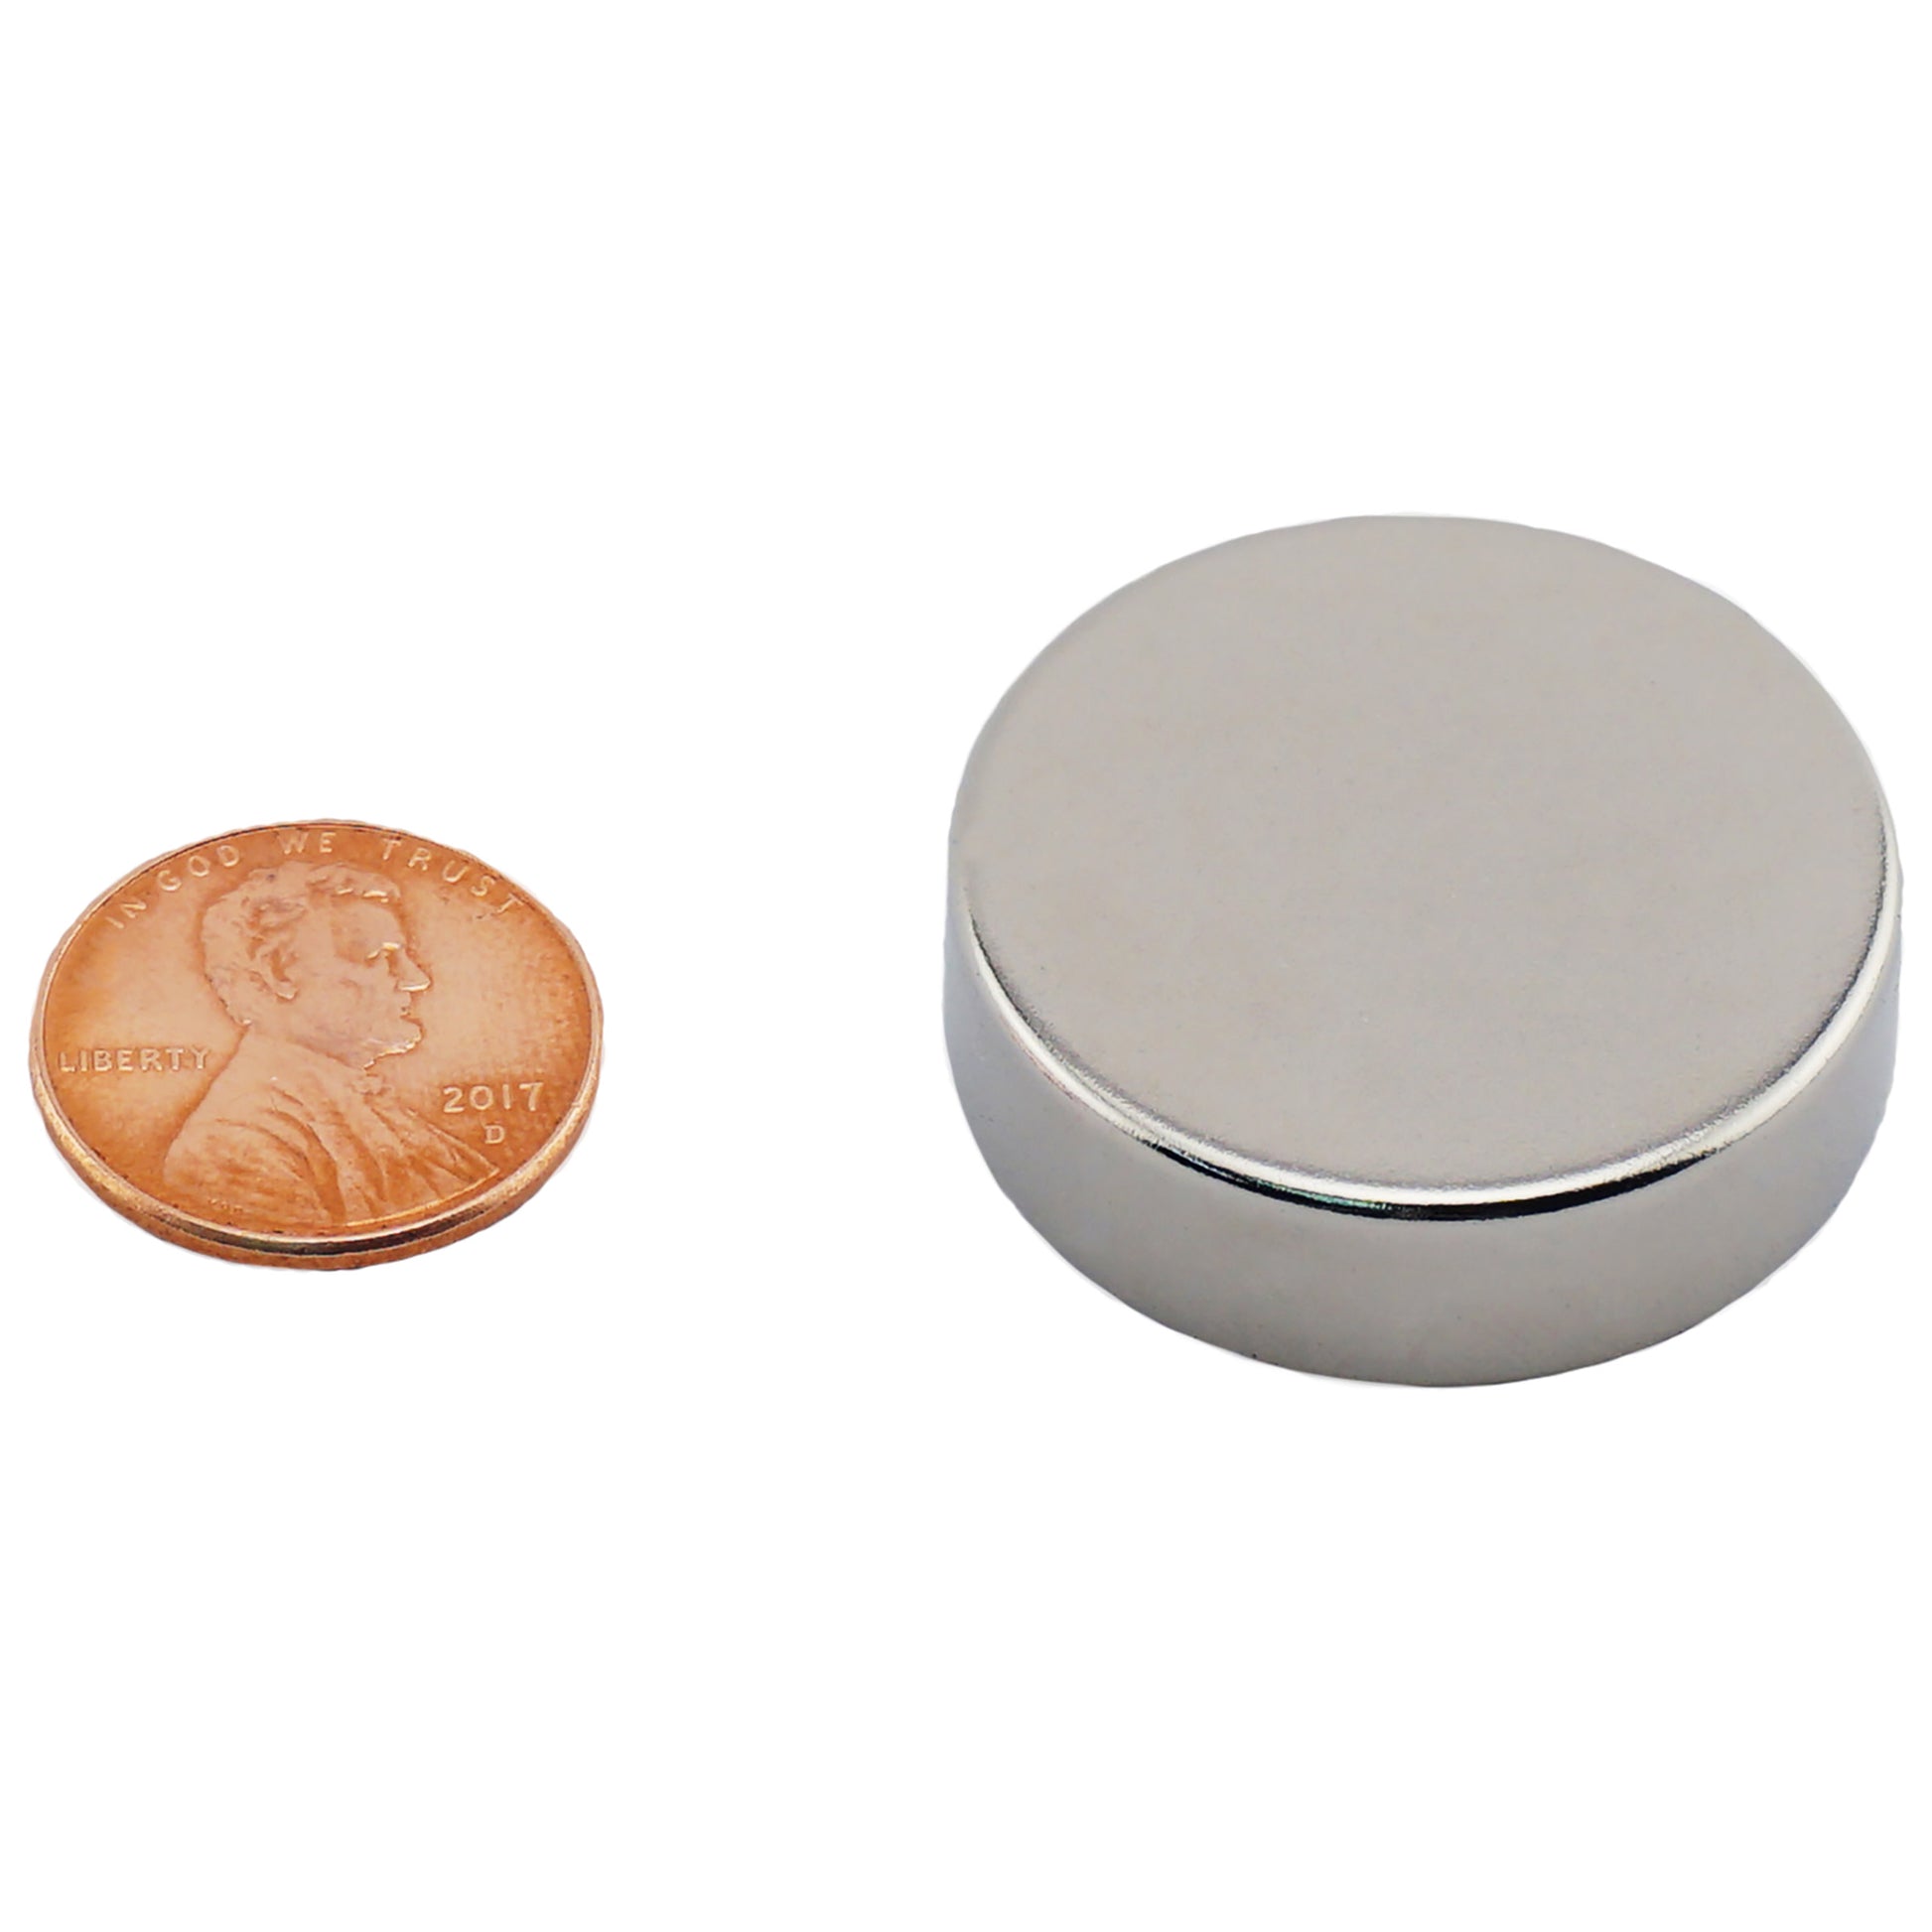 Load image into Gallery viewer, ND012508N Neodymium Disc Magnet - Compared to Penny for Size Reference